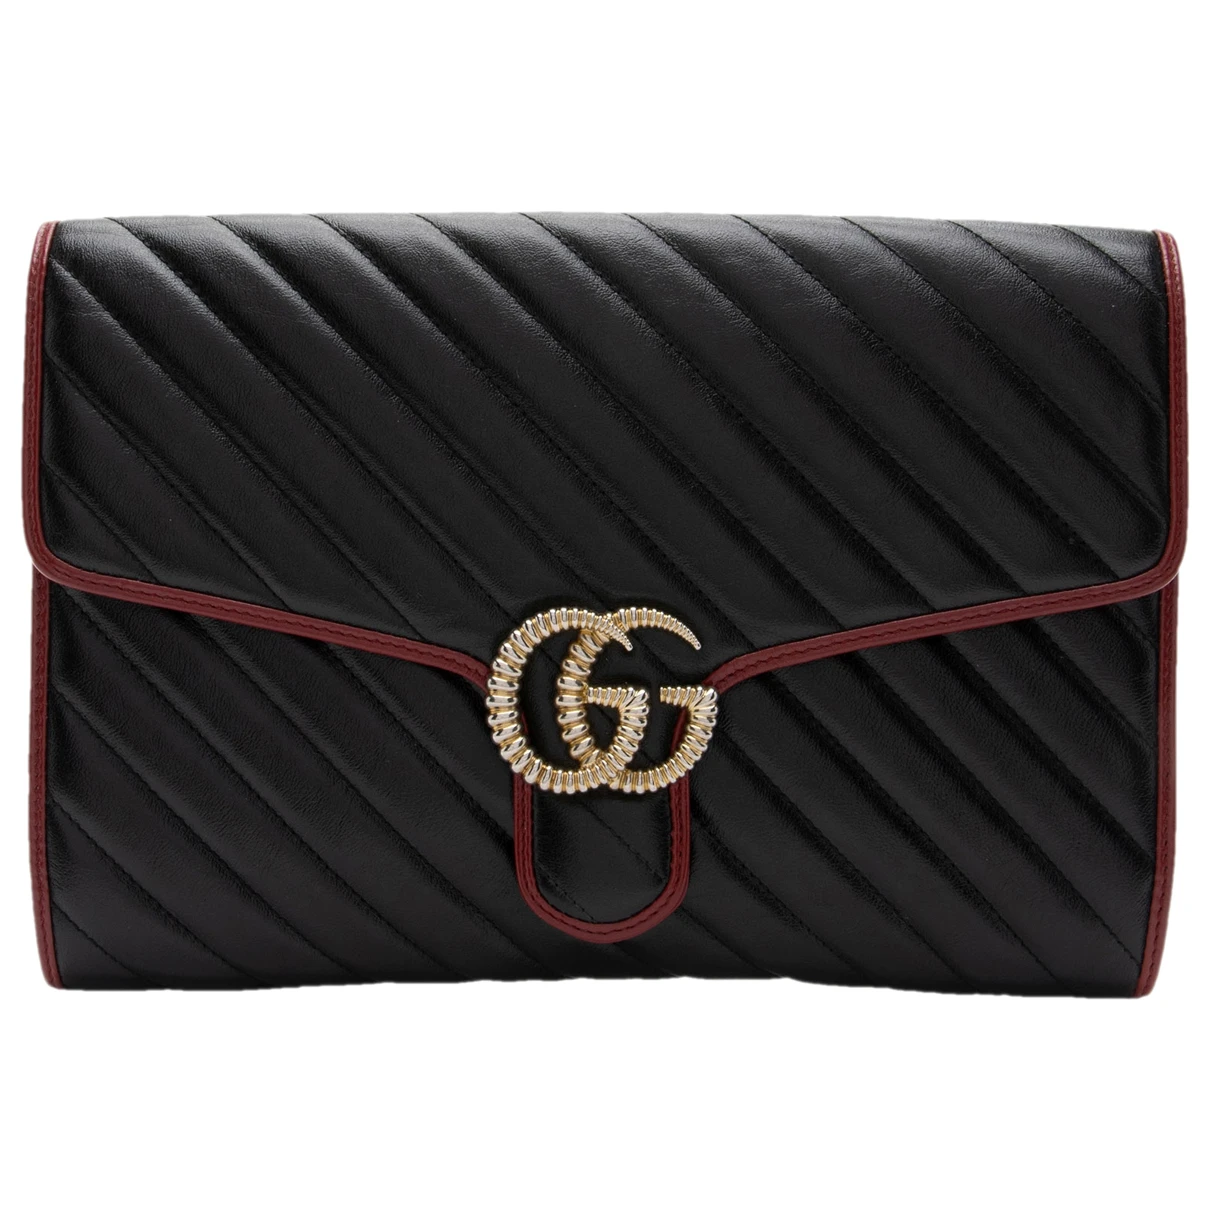 bags Gucci clutch bags Marmont for Female Leather. Used condition